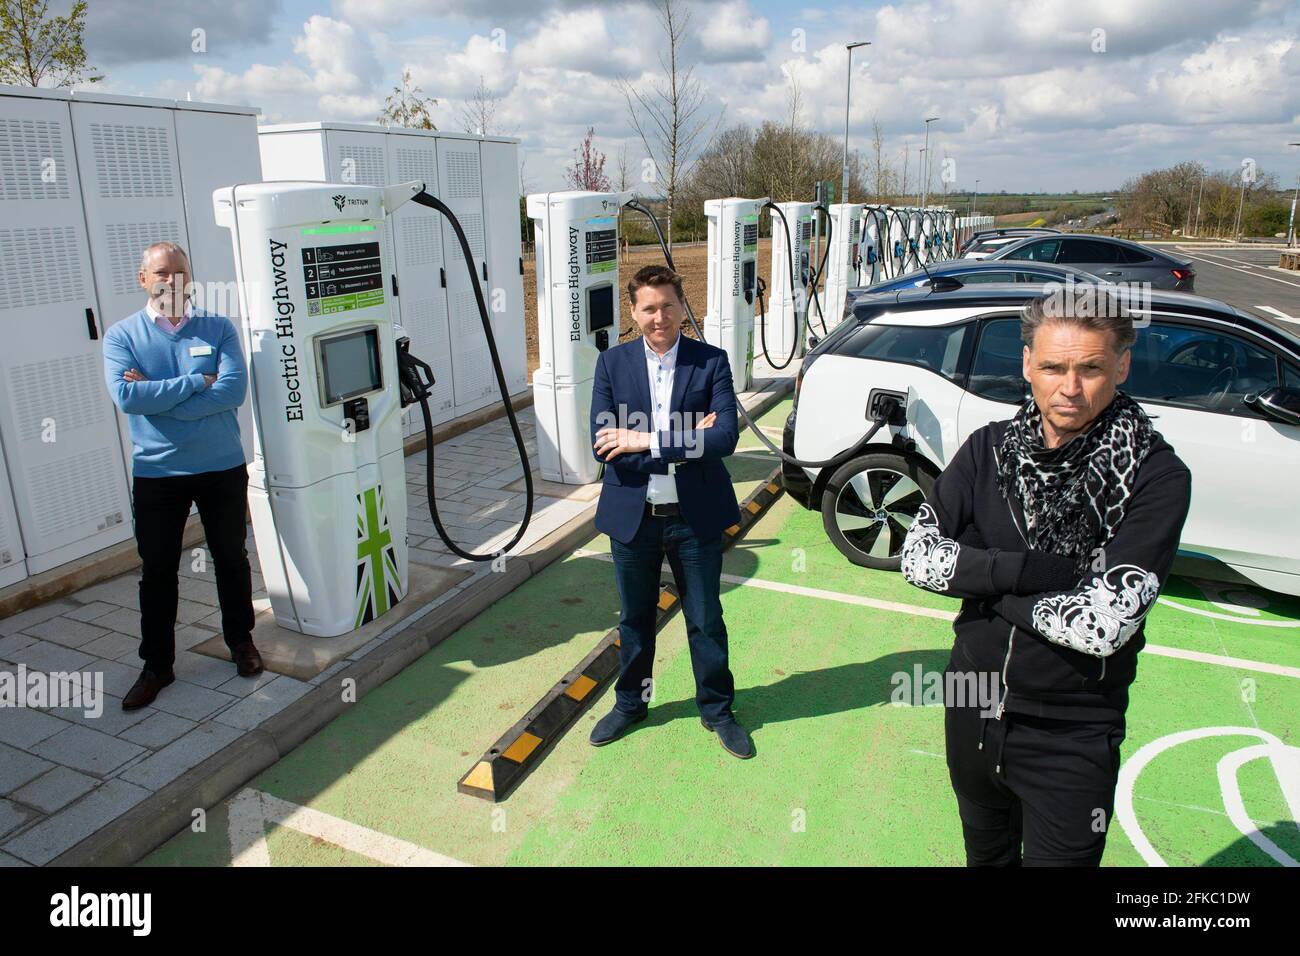 EDITORIAL USE ONLY Ken McMeikan, Moto CEO, Toddington Harper, Founder and CEO of GRIDSERVE and Dale Vince, CEO of Ecotricity at the launch of the UK's largest high power motorway electric vehicle charging site, which features 24 high-powered 350kW EV chargers provided by GRIDSERVE, Ecotricity and Tesla at Moto's new Rugby Services. Picture date: Friday April 30, 2021. Stock Photo